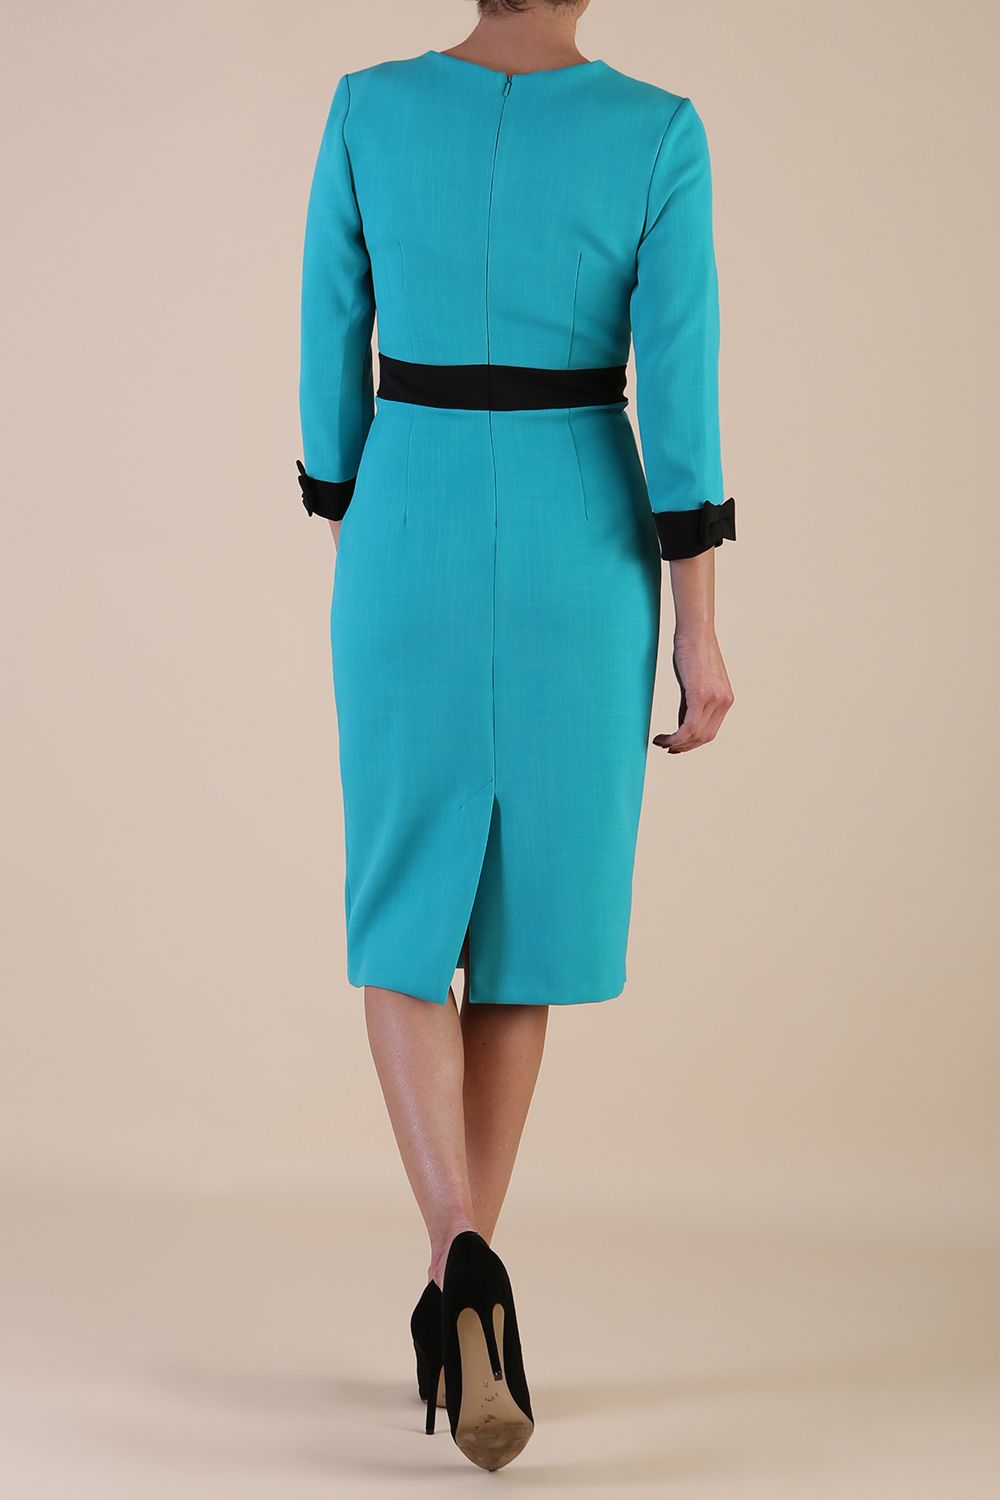 Model wearing diva catwalk Reese 3/4 Sleeved pencil skirt dress with a contrast sleeve and waistband details in Aqua Green/Black